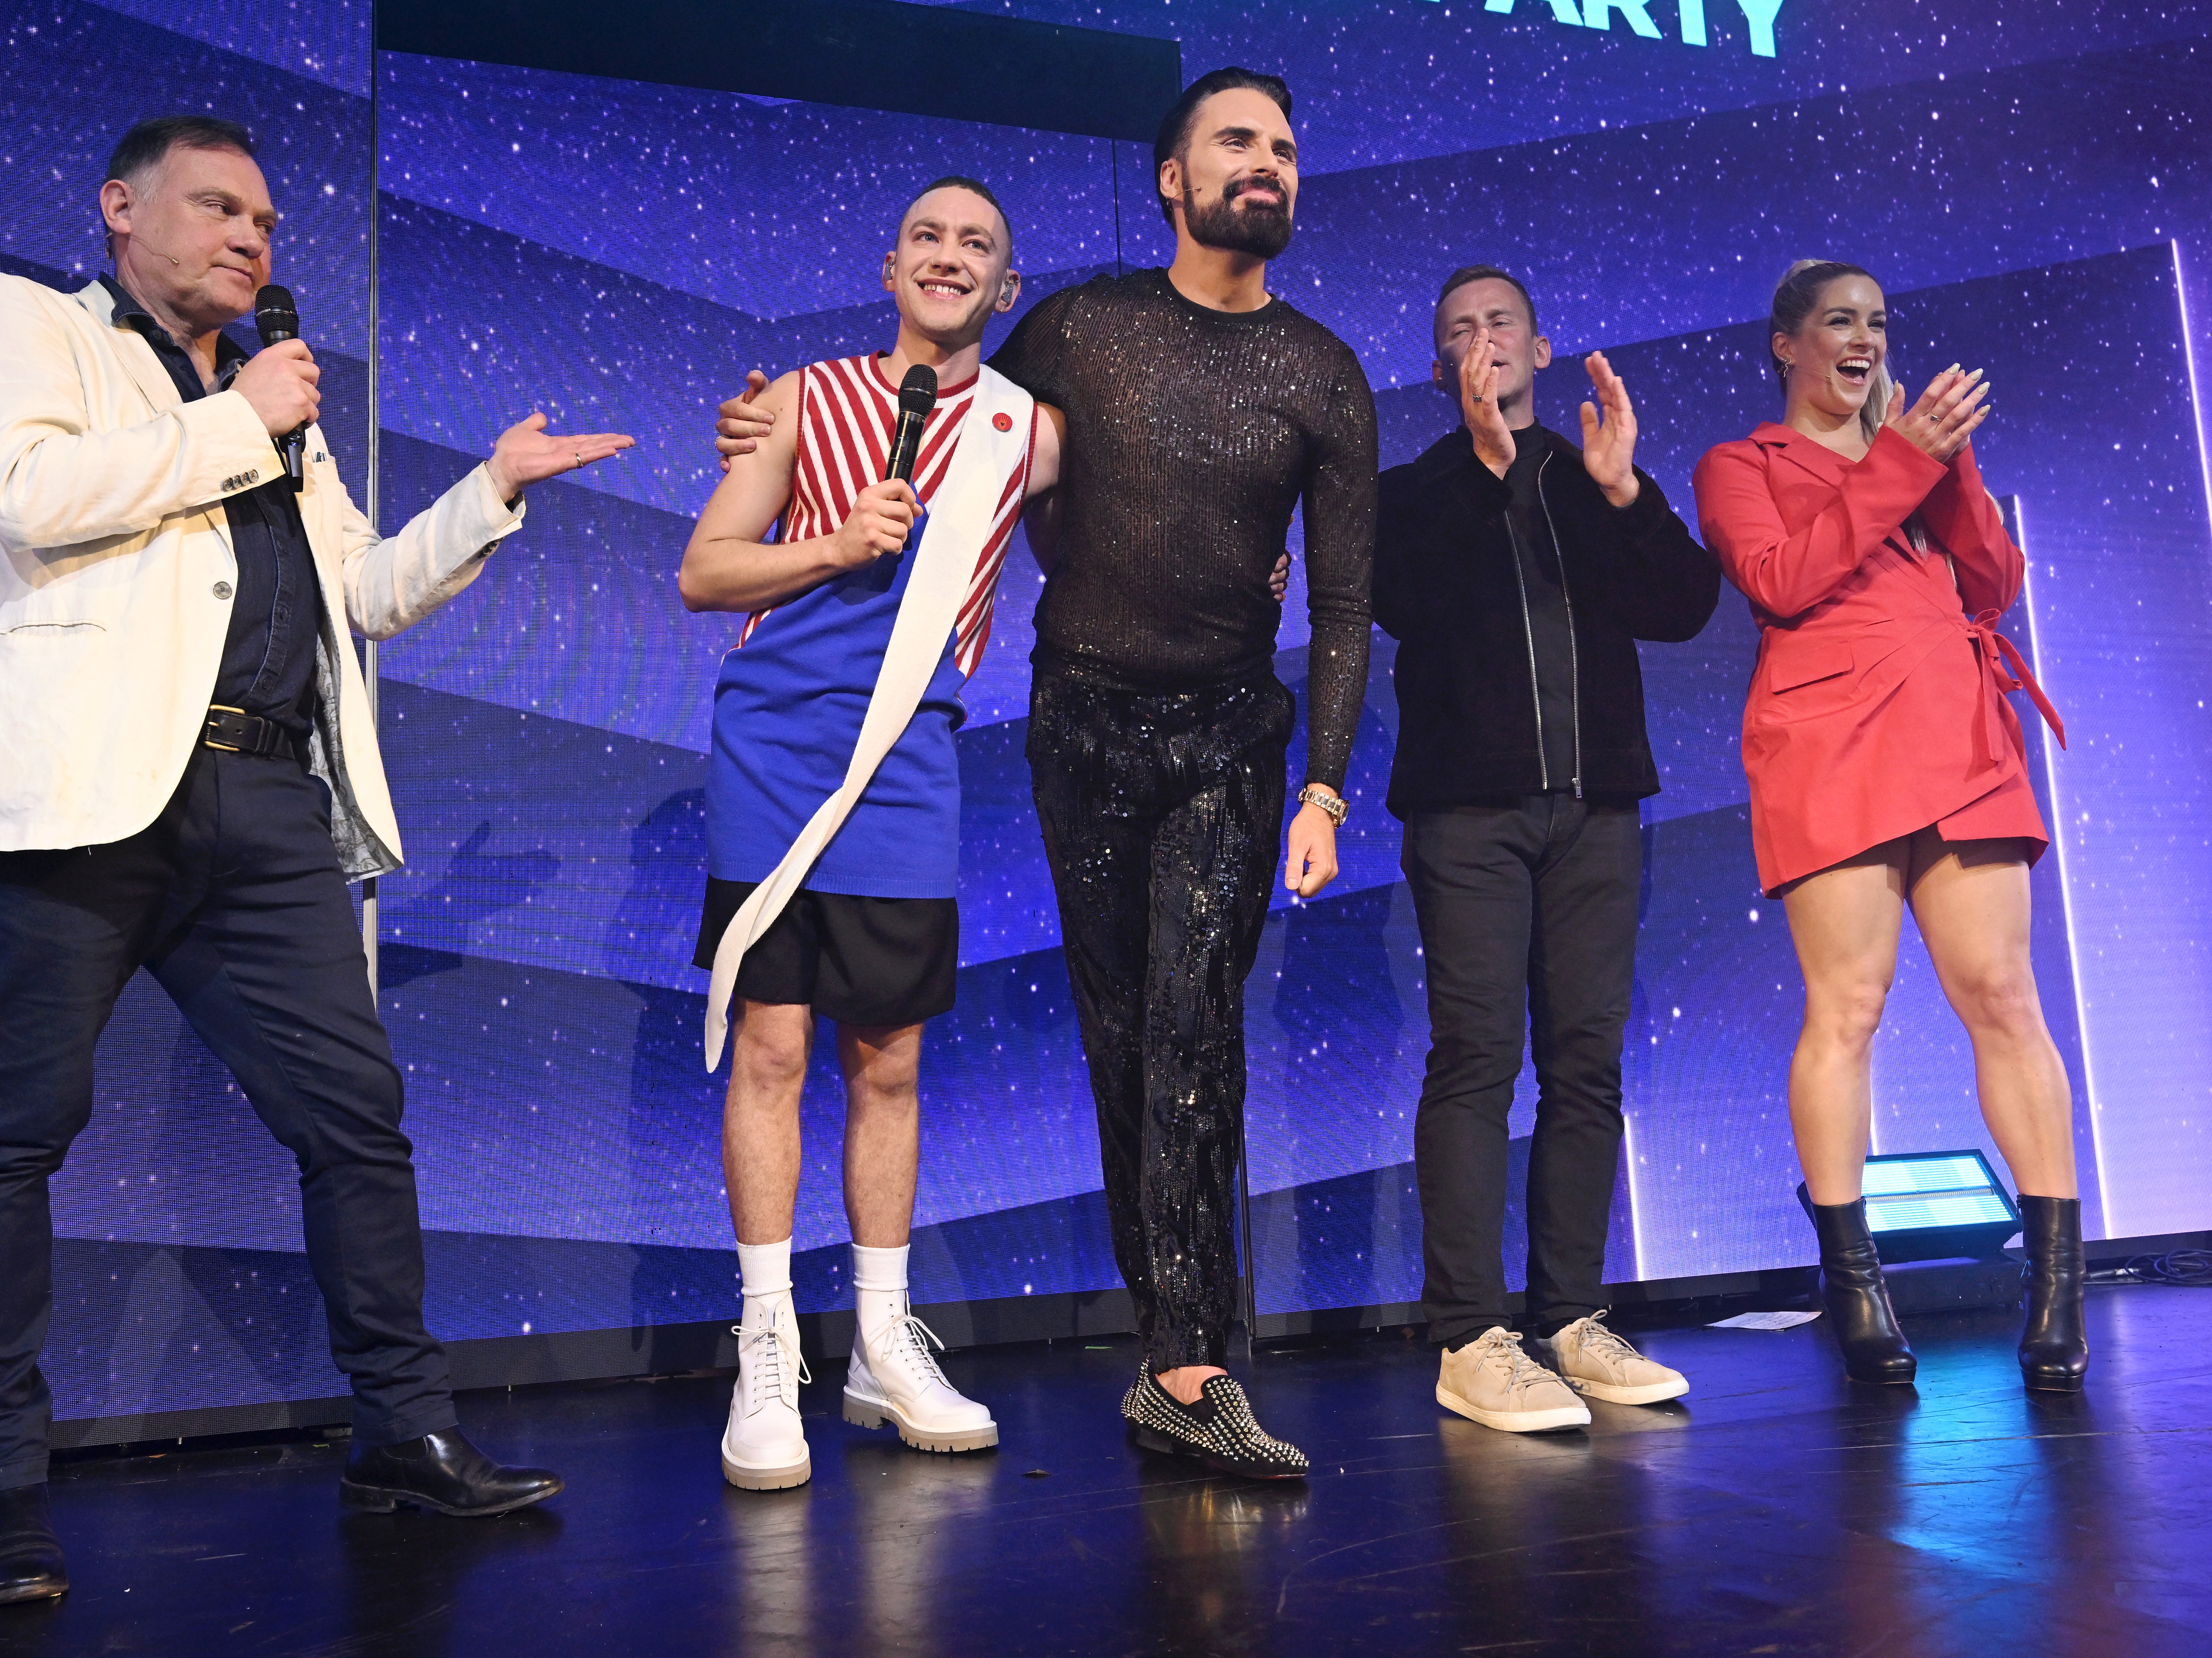 Olly Alexander (second from left) with Paddy O’Connell (left), Rylan Clark, Scott Mills and Lucie Jones during the London Eurovision Party in April